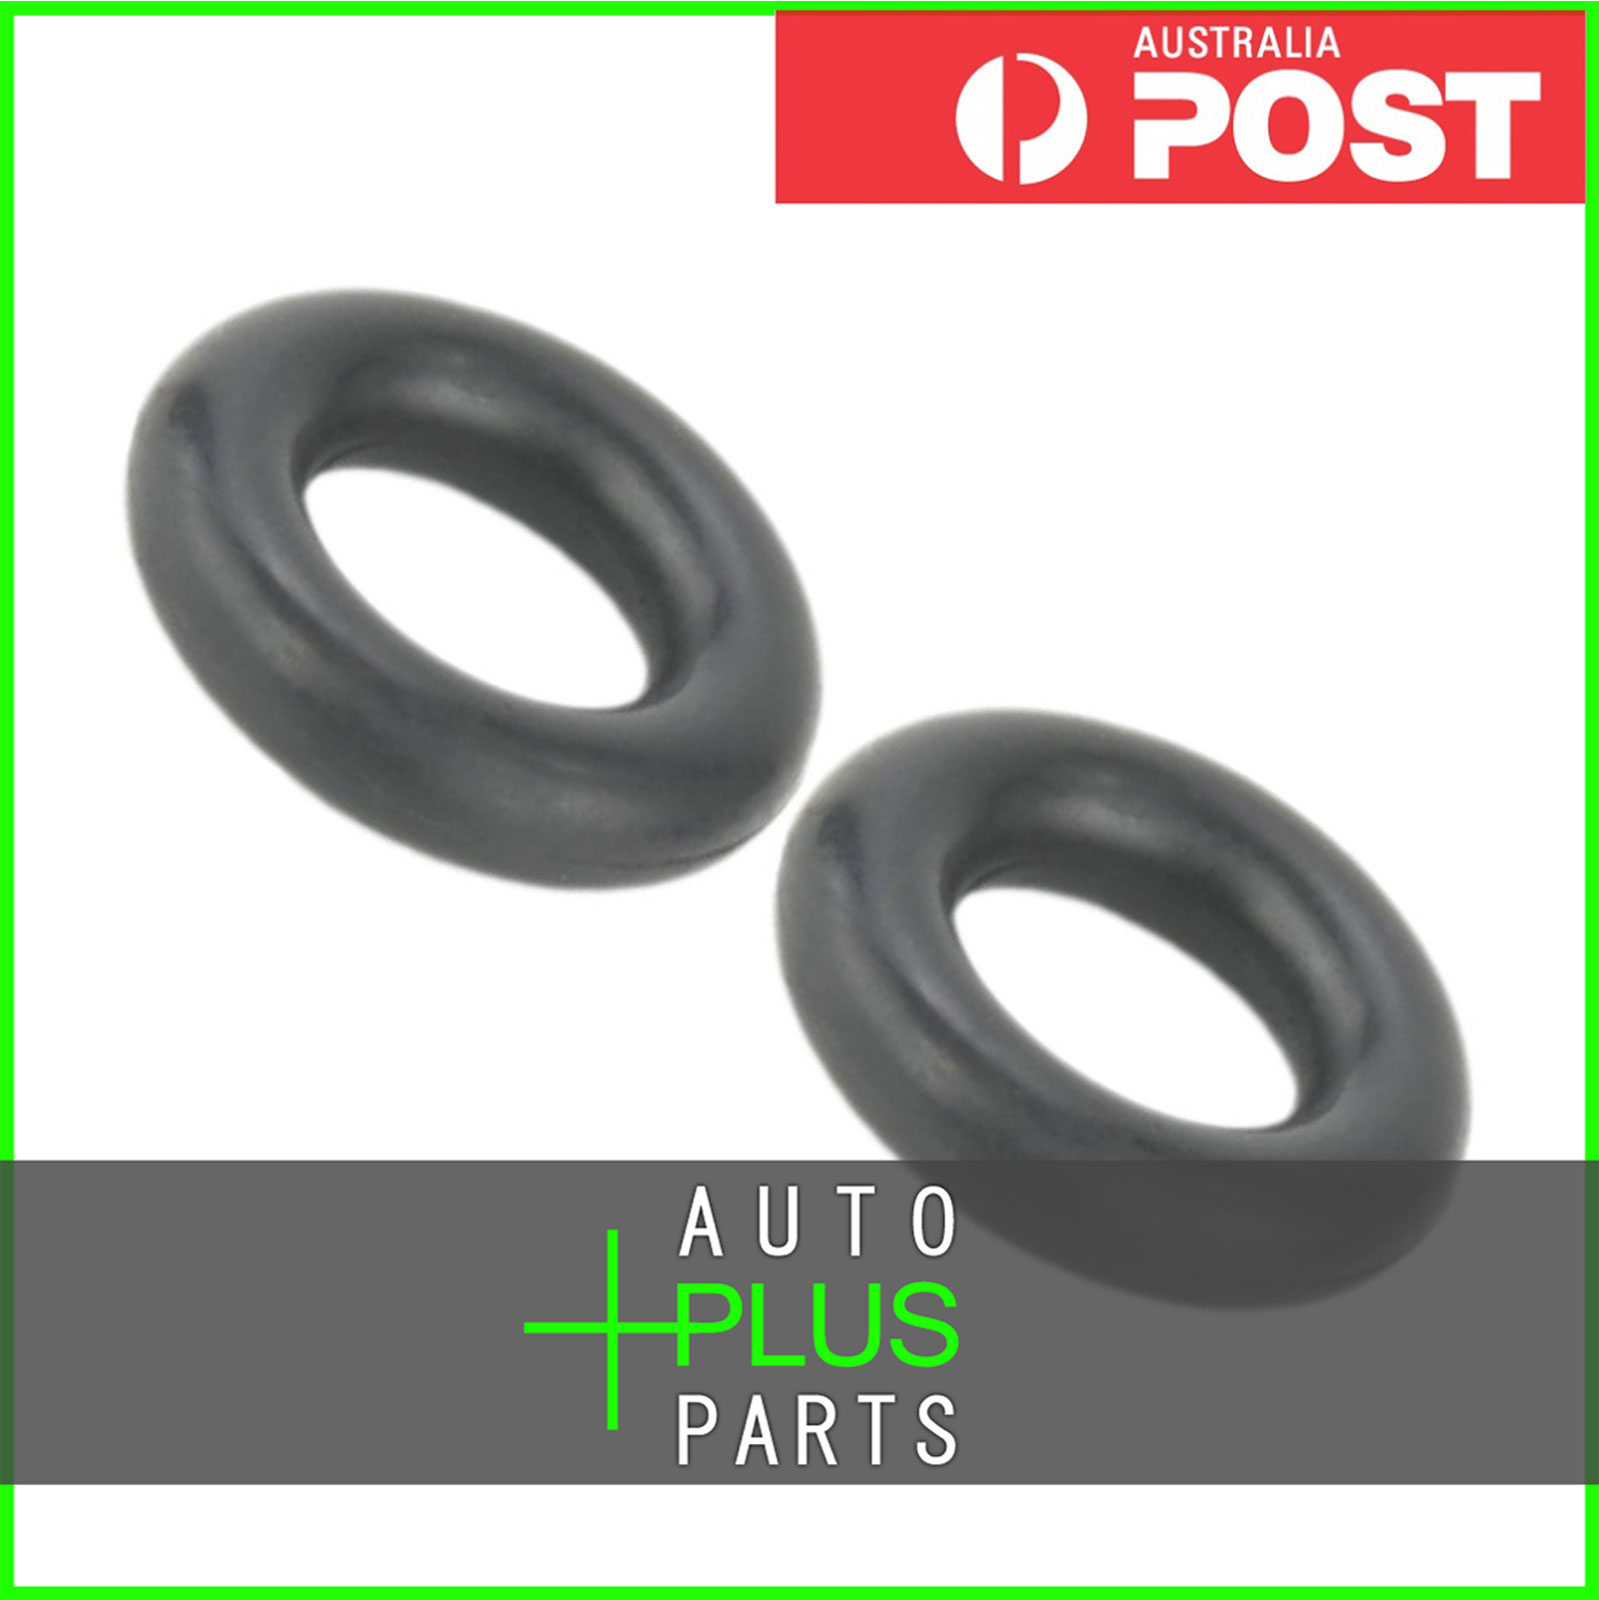 Fits HONDA JAZZ O-RING FUEL INJECTOR PCS 2 - GD1,GD3,GD5,GE3,GE6,GE8,GG1,GG2,GG3 Product Photo